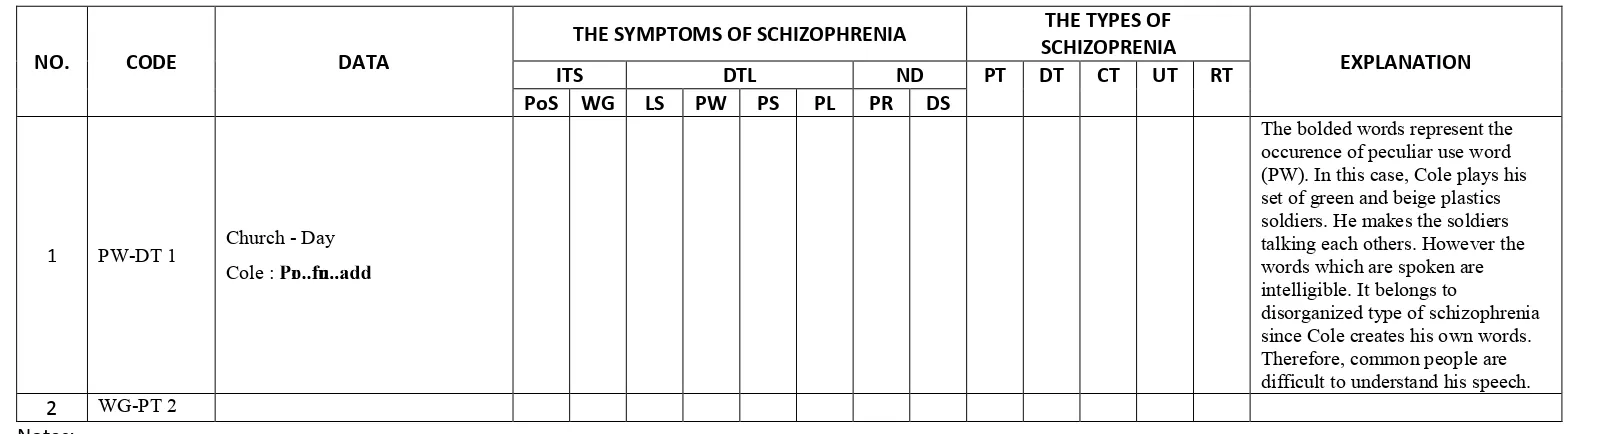 TABLE 1: Sample Data sheet of the symptoms and types of schizophrenia experienced by a schizophrenic sufferer, Cole Sear, in The Sixth Sense movie